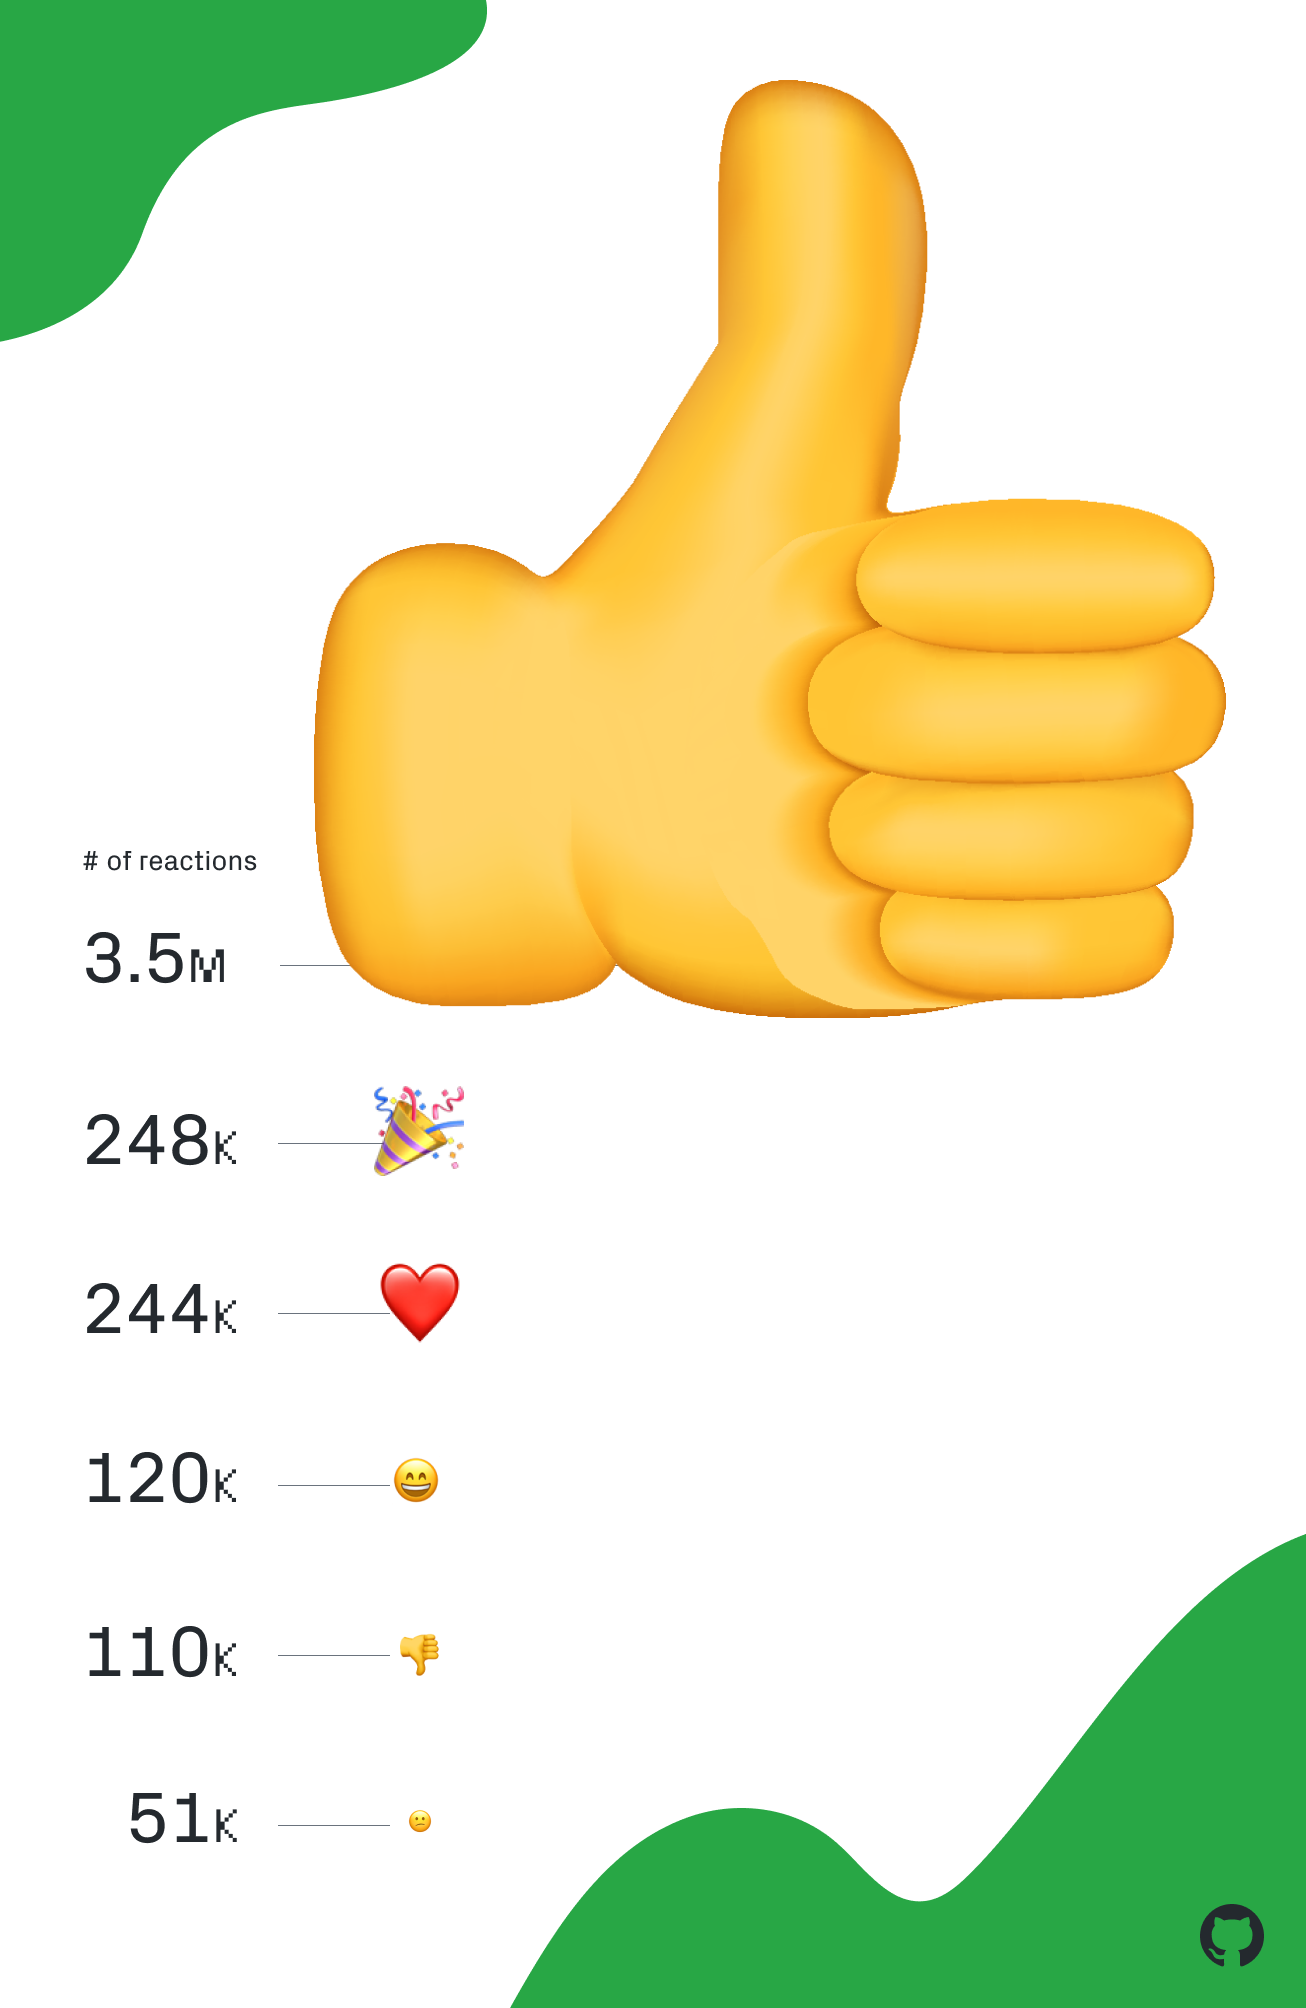 Chart of total reactions by emoji